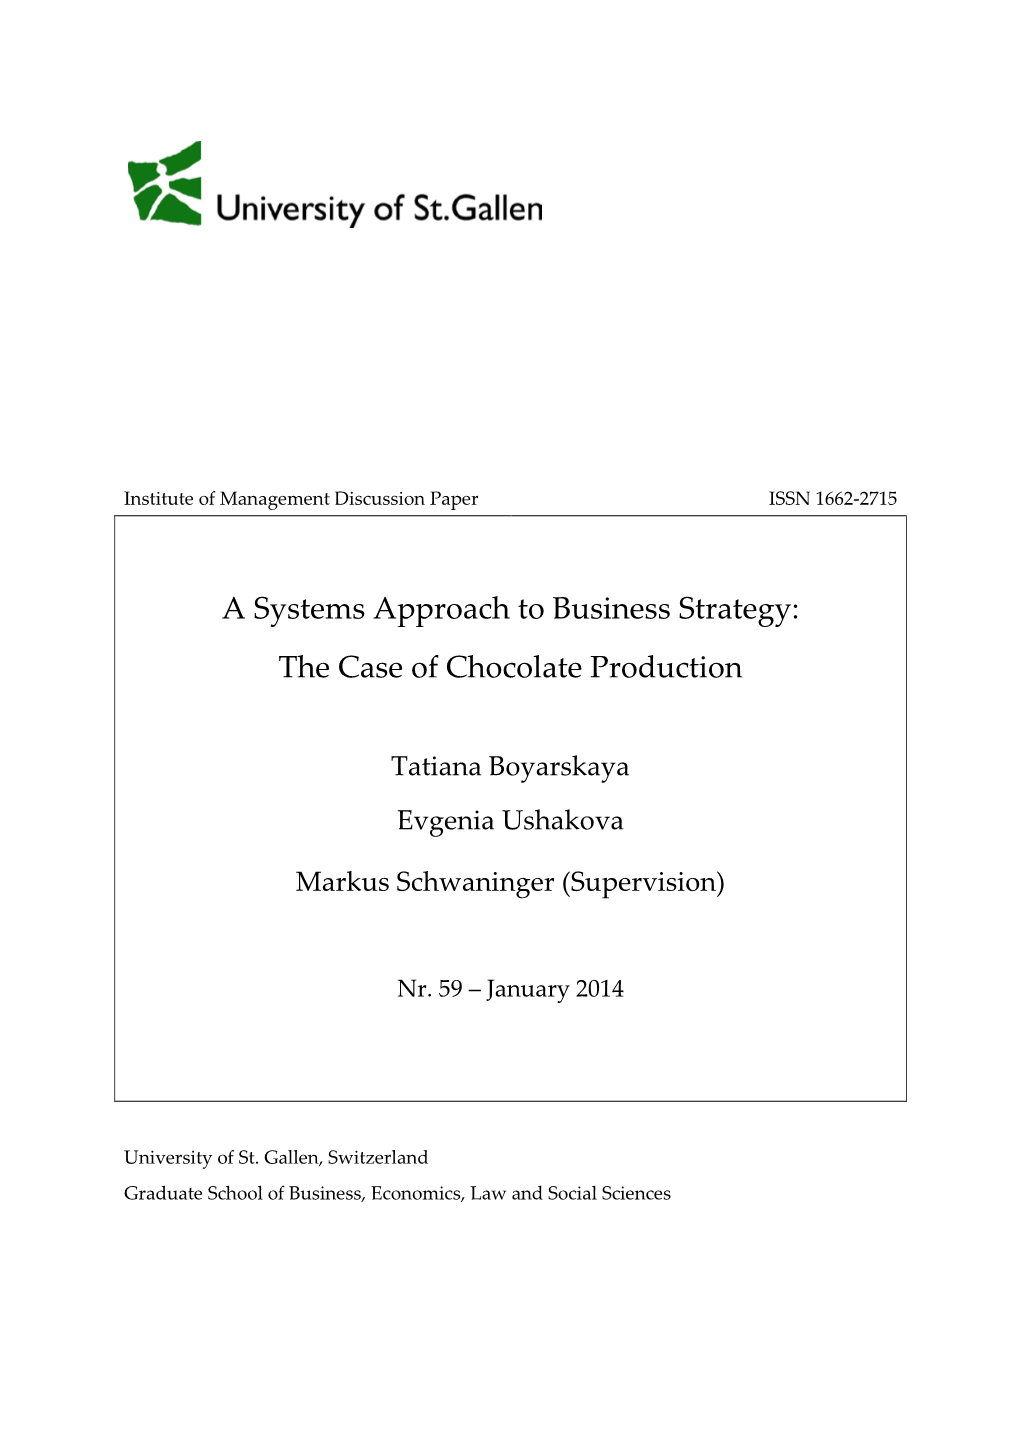 A Systems Approach to Business Strategy: the Case of Chocolate Production